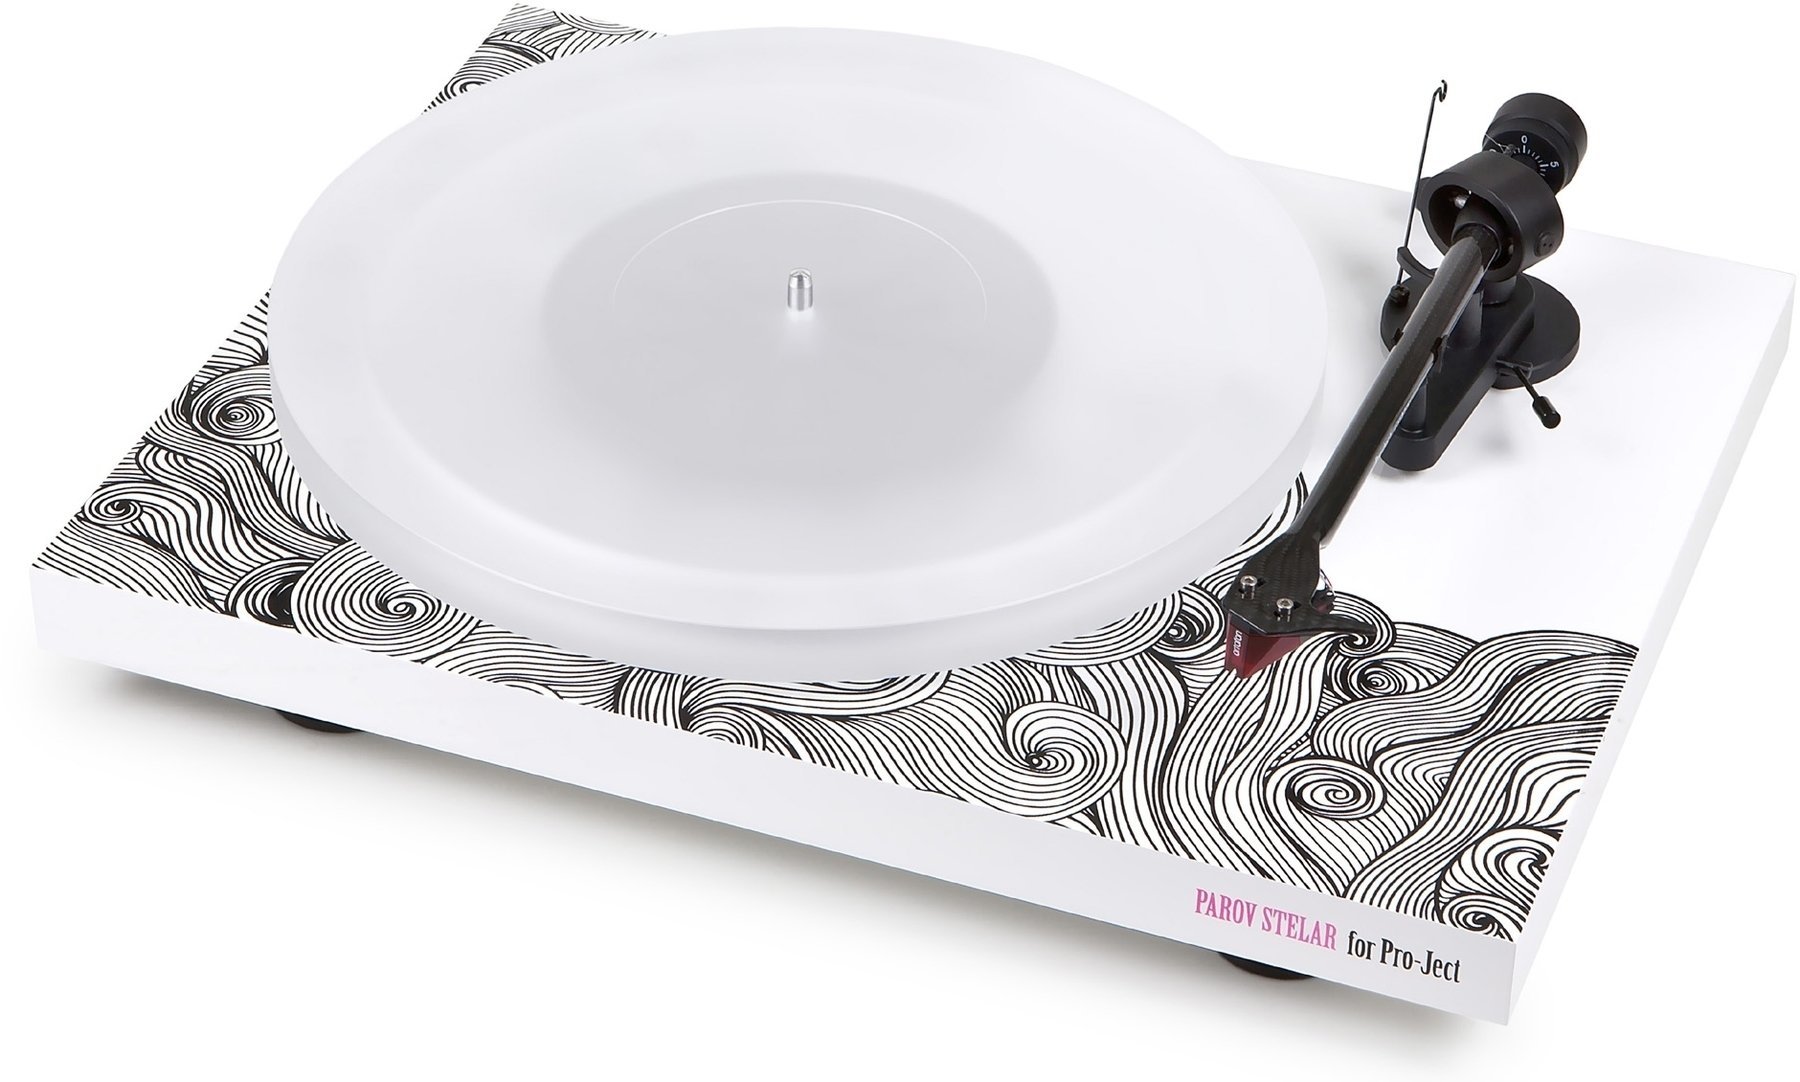 Turntable Pro-Ject PS01-Wave by Parov Stelar 2M RD White